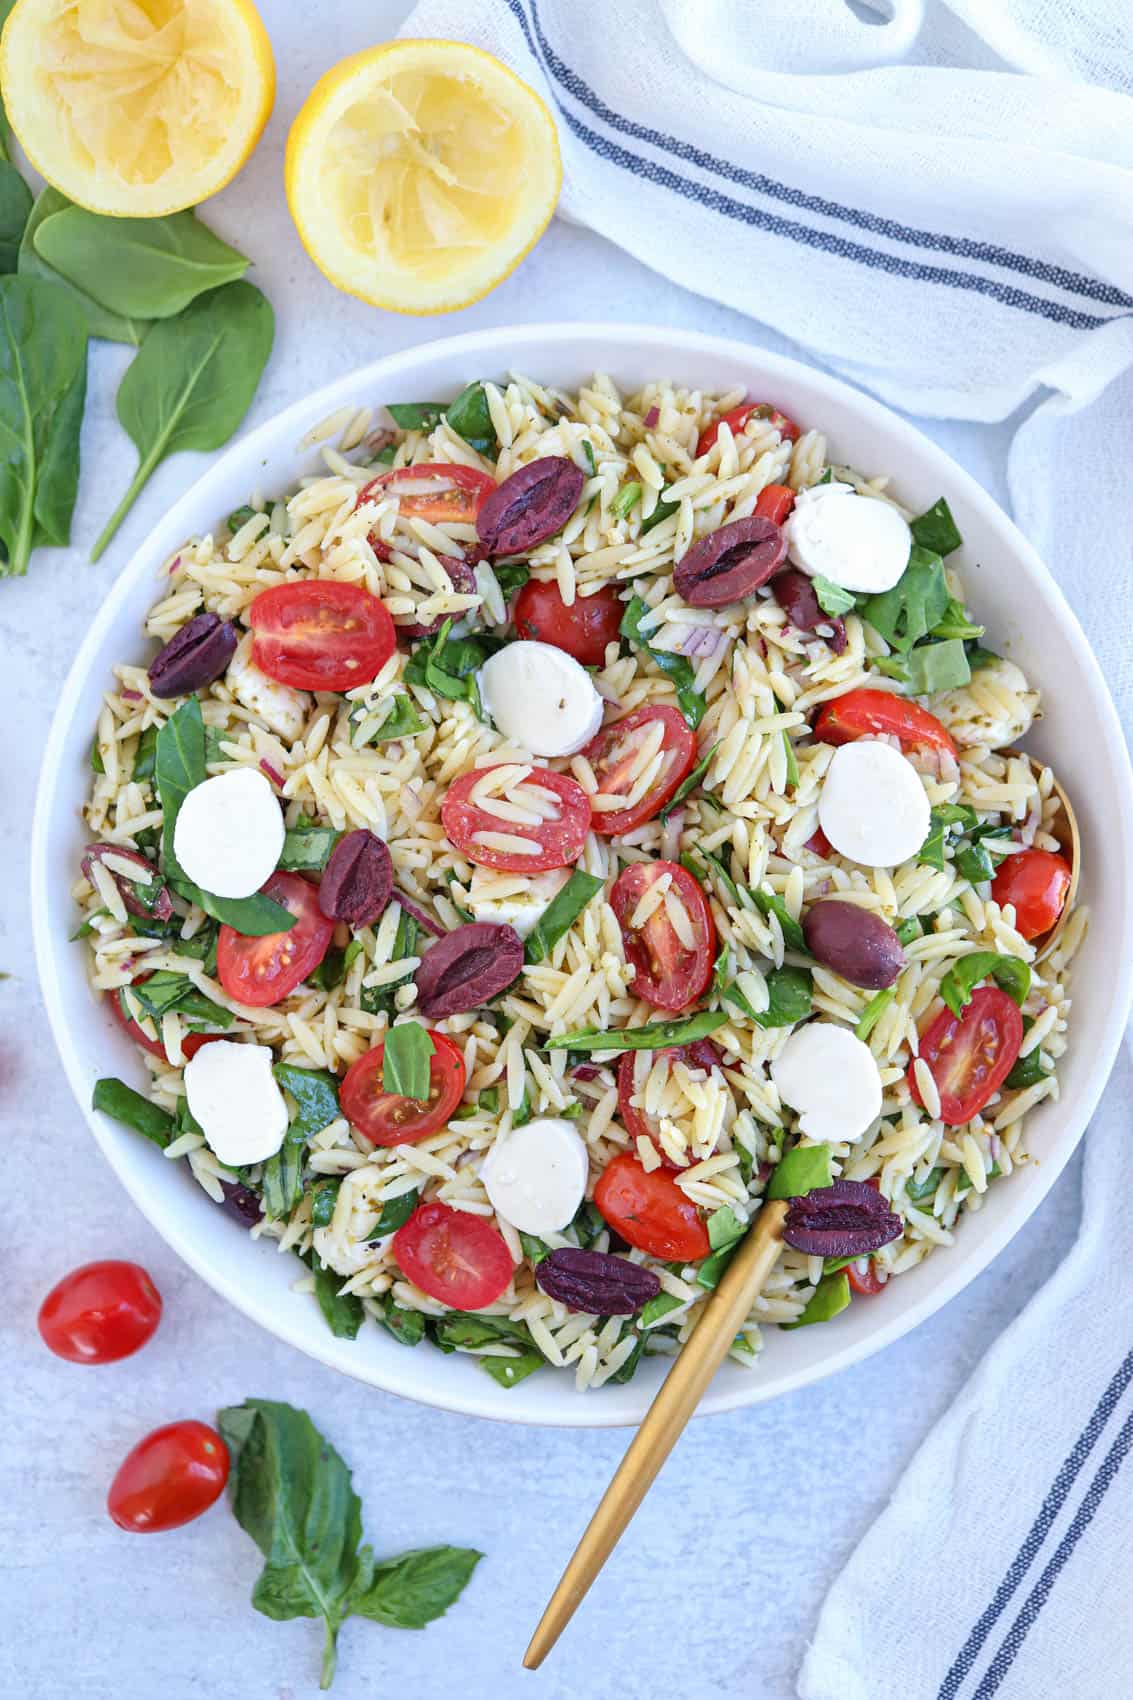 orzo pasta salad with spinach, olives, cherry tomatoes, mozzarella cheese and pesto.